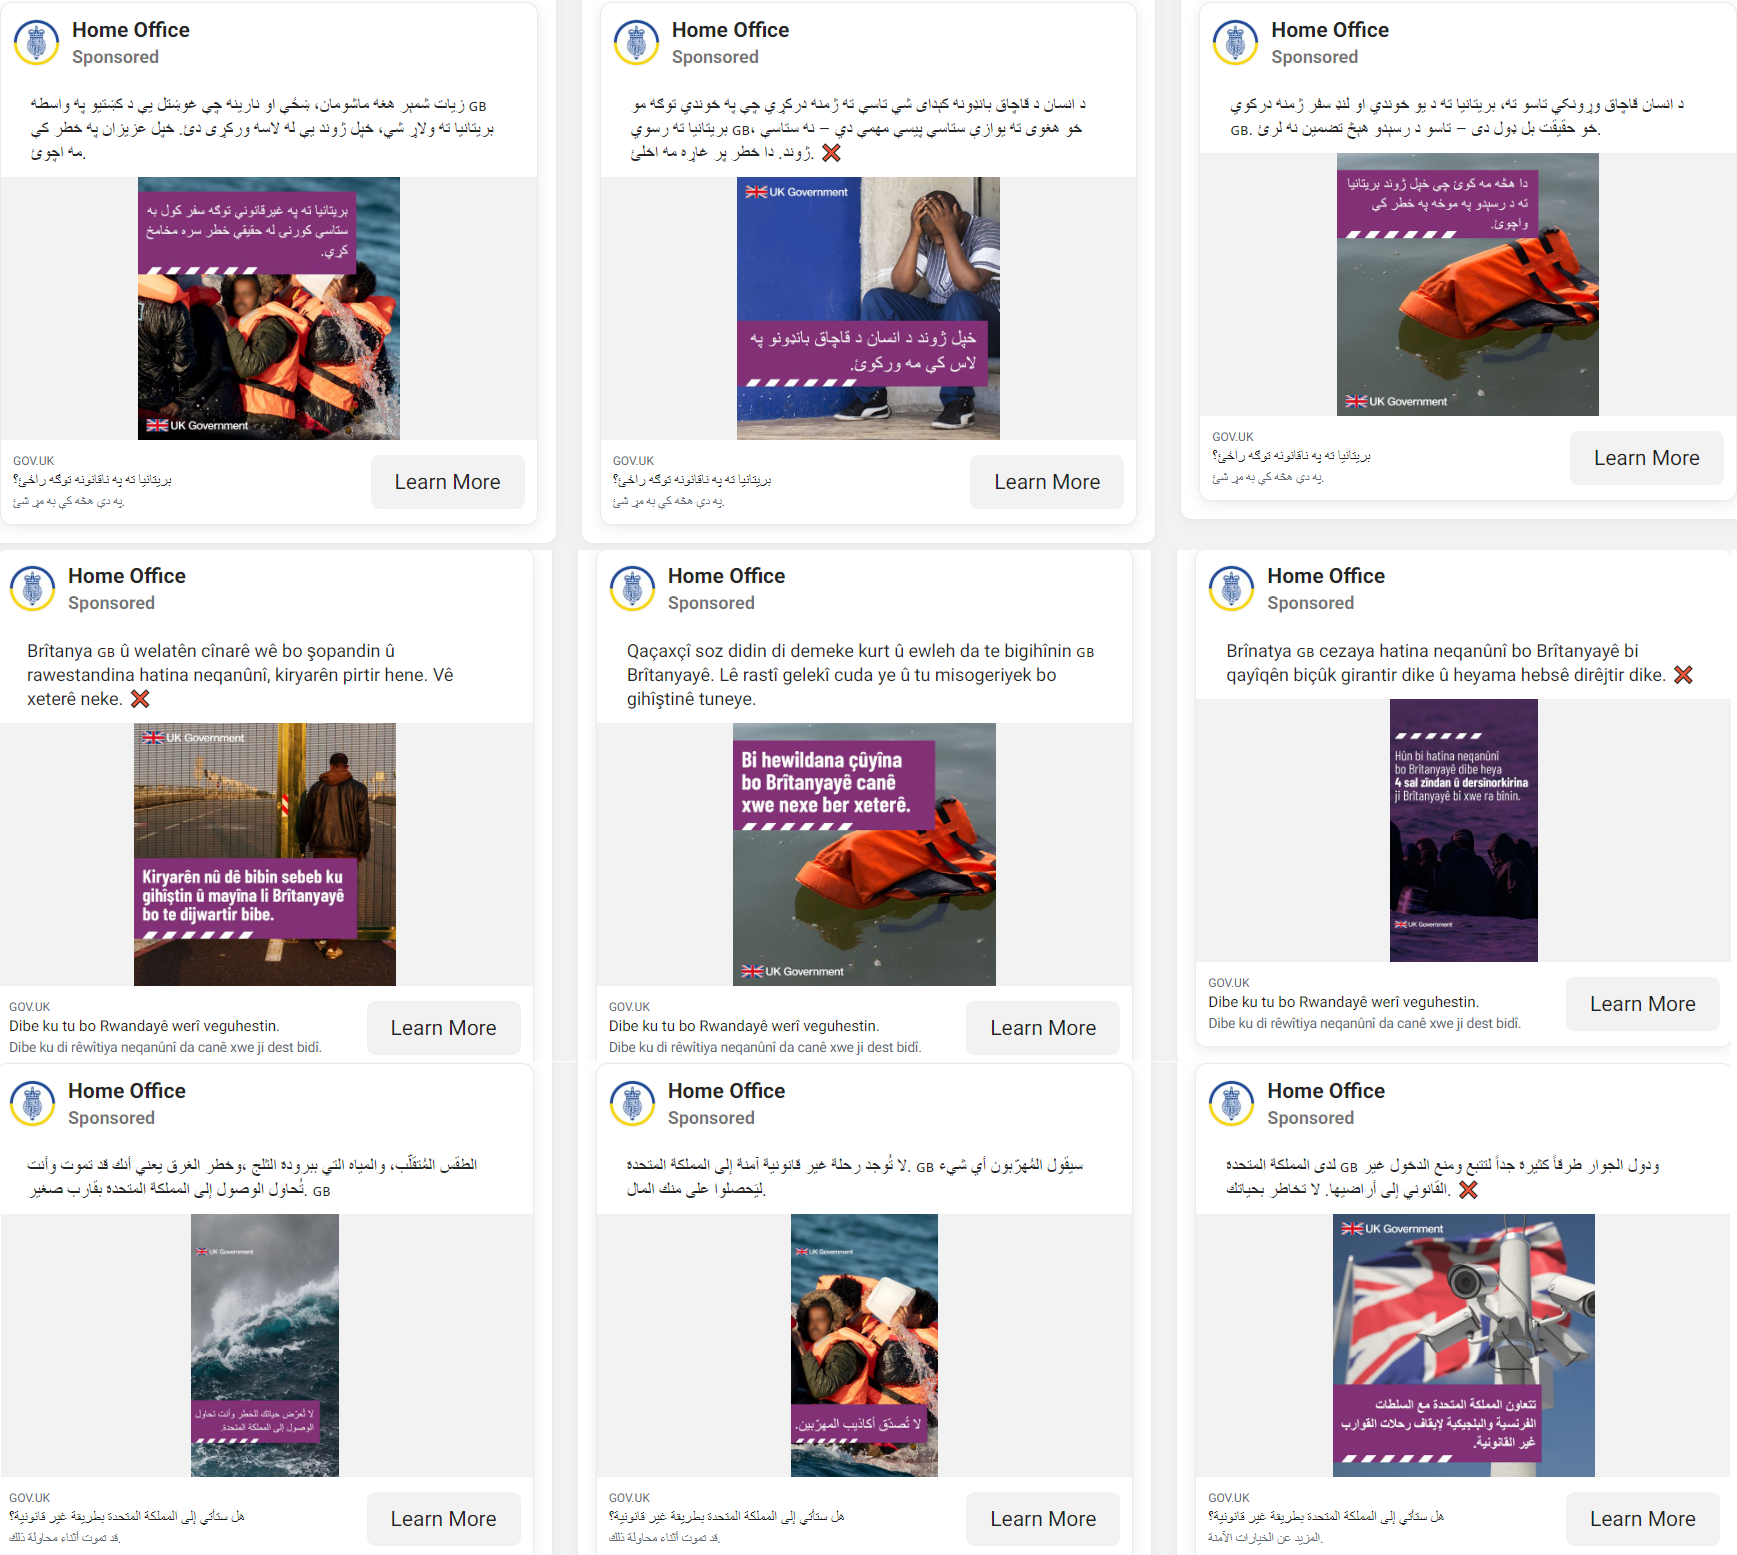 A selection of adverts shown to target audiences on Facebook and Instagram in an effort to deter small boat migrants